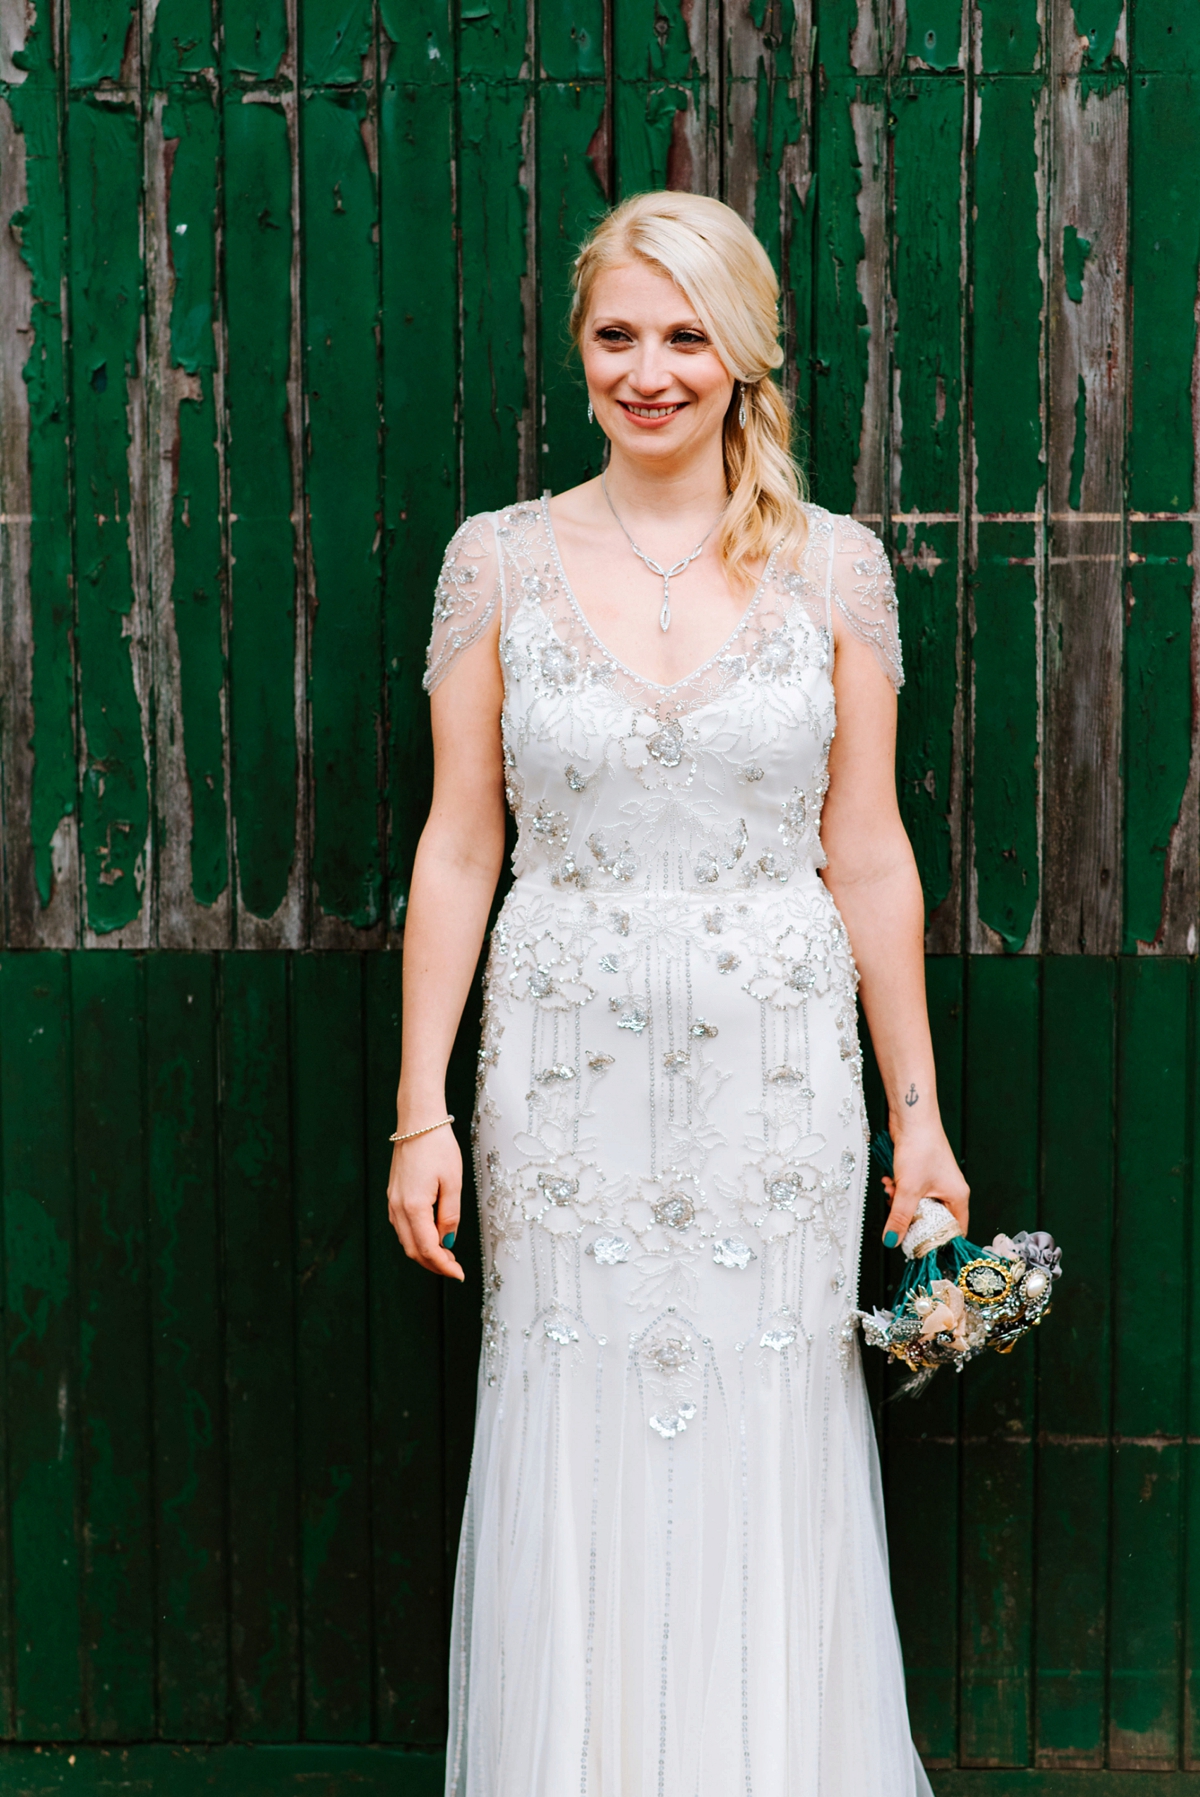 26 A Jenny Packham beaded gown for a lovely laidback country barn wedding